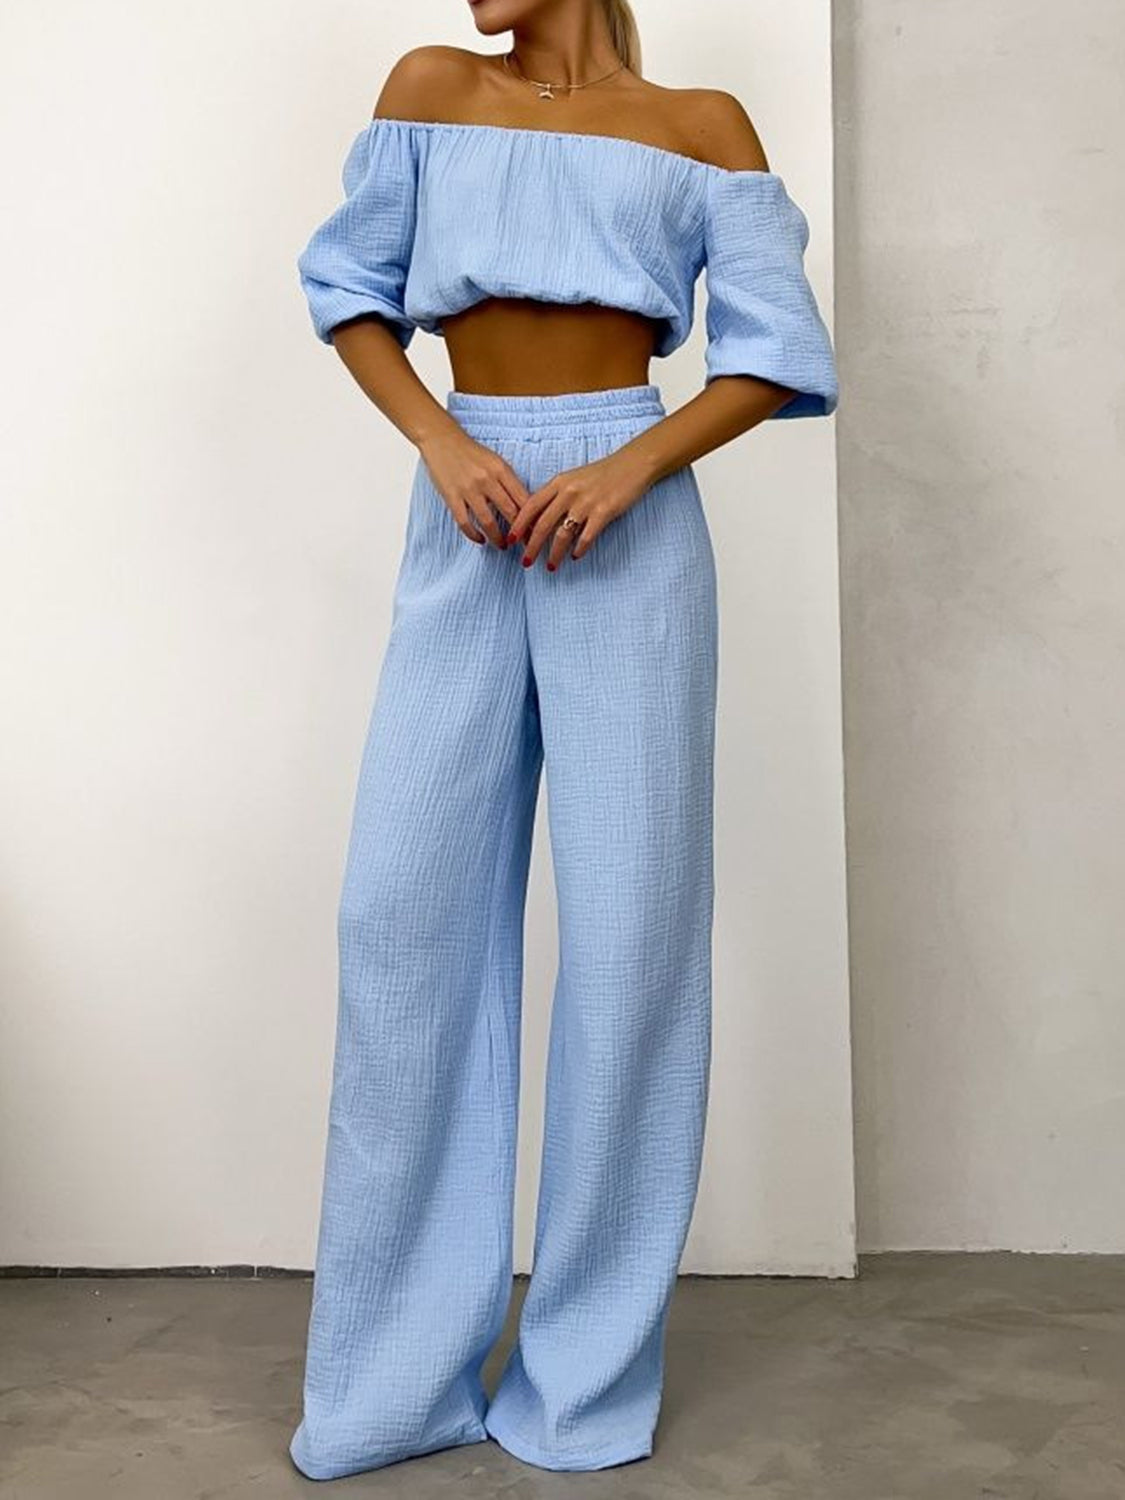 OFF THE SHOULDER LONG SLEEVE TOP AND PANTS SET